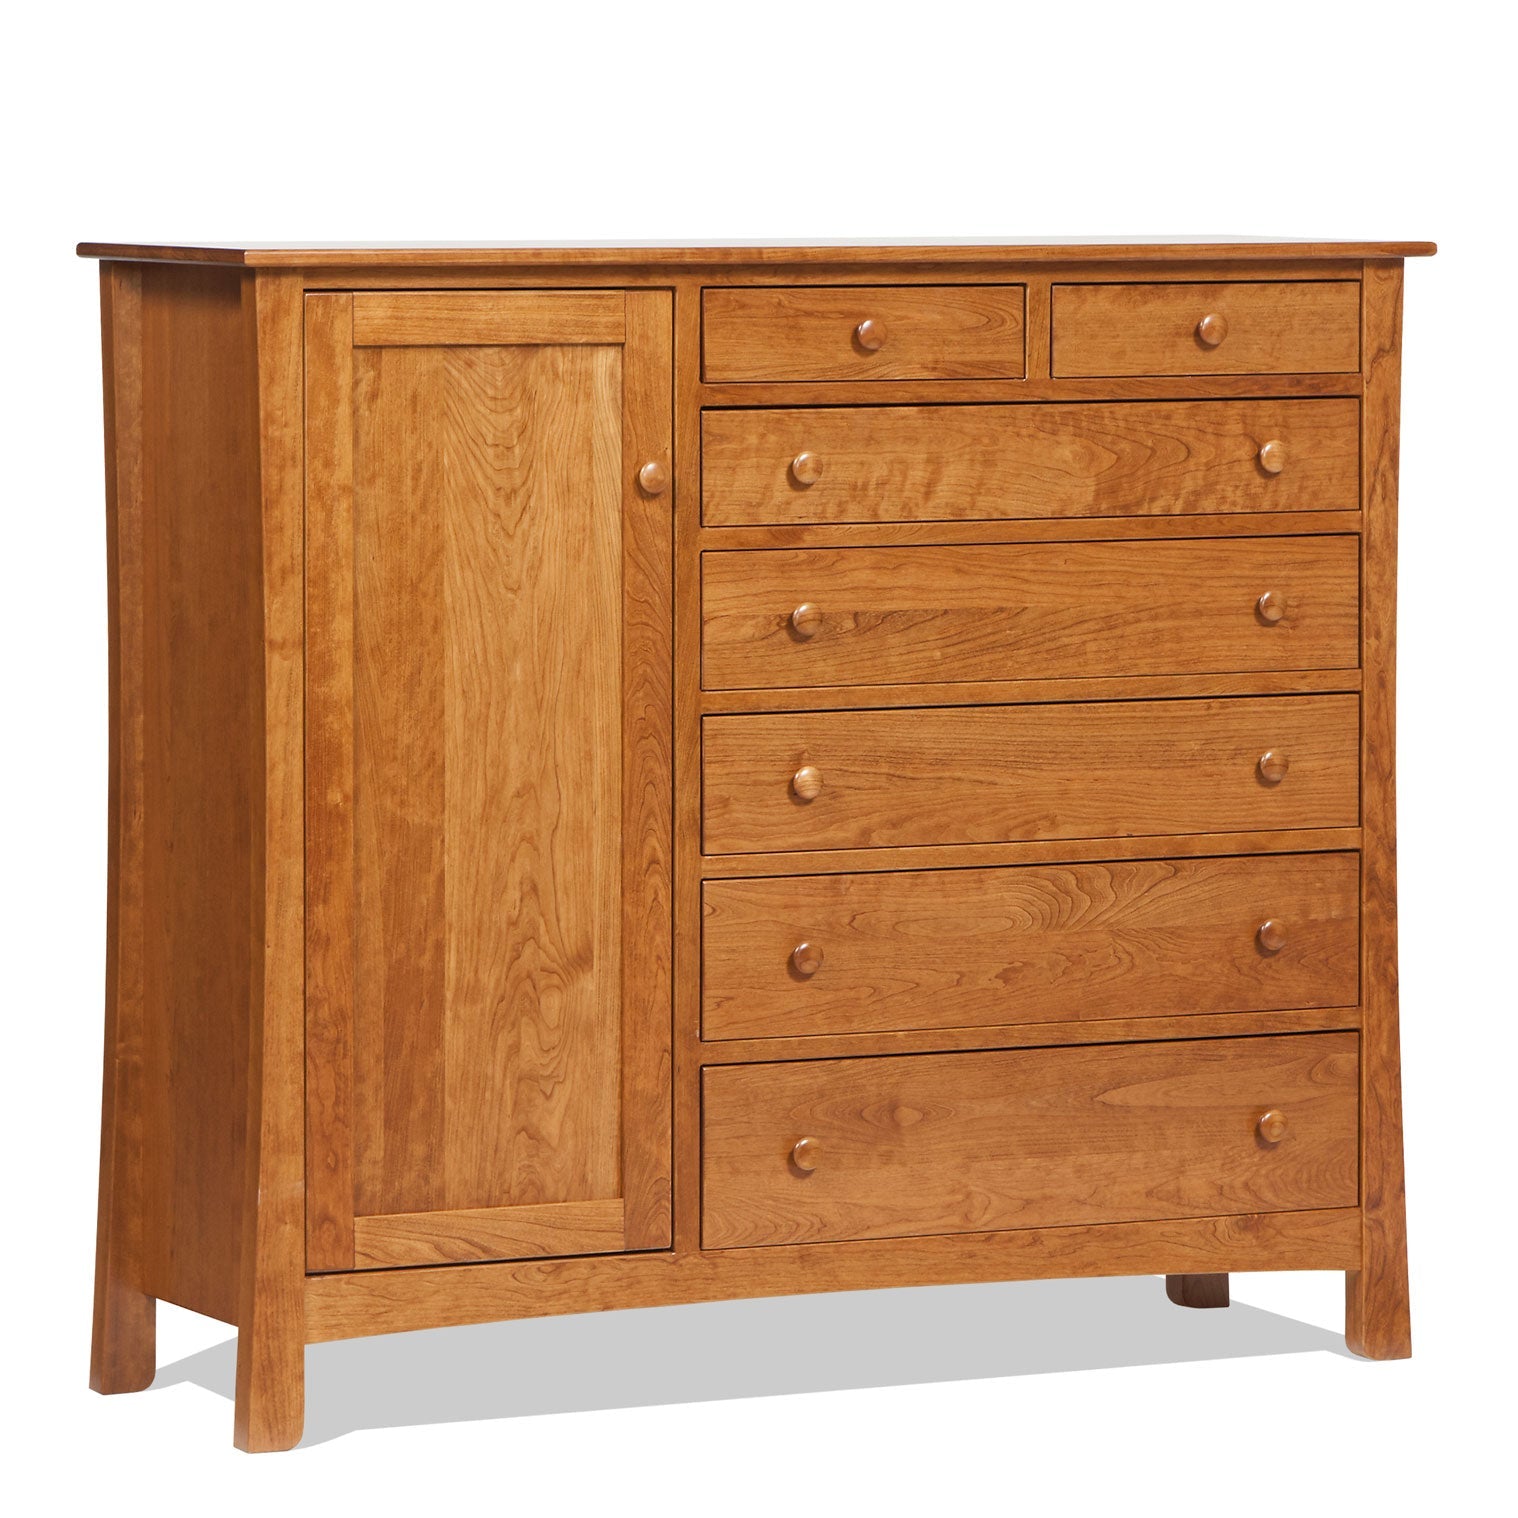 New Transitions Gents Chest - snyders.furniture